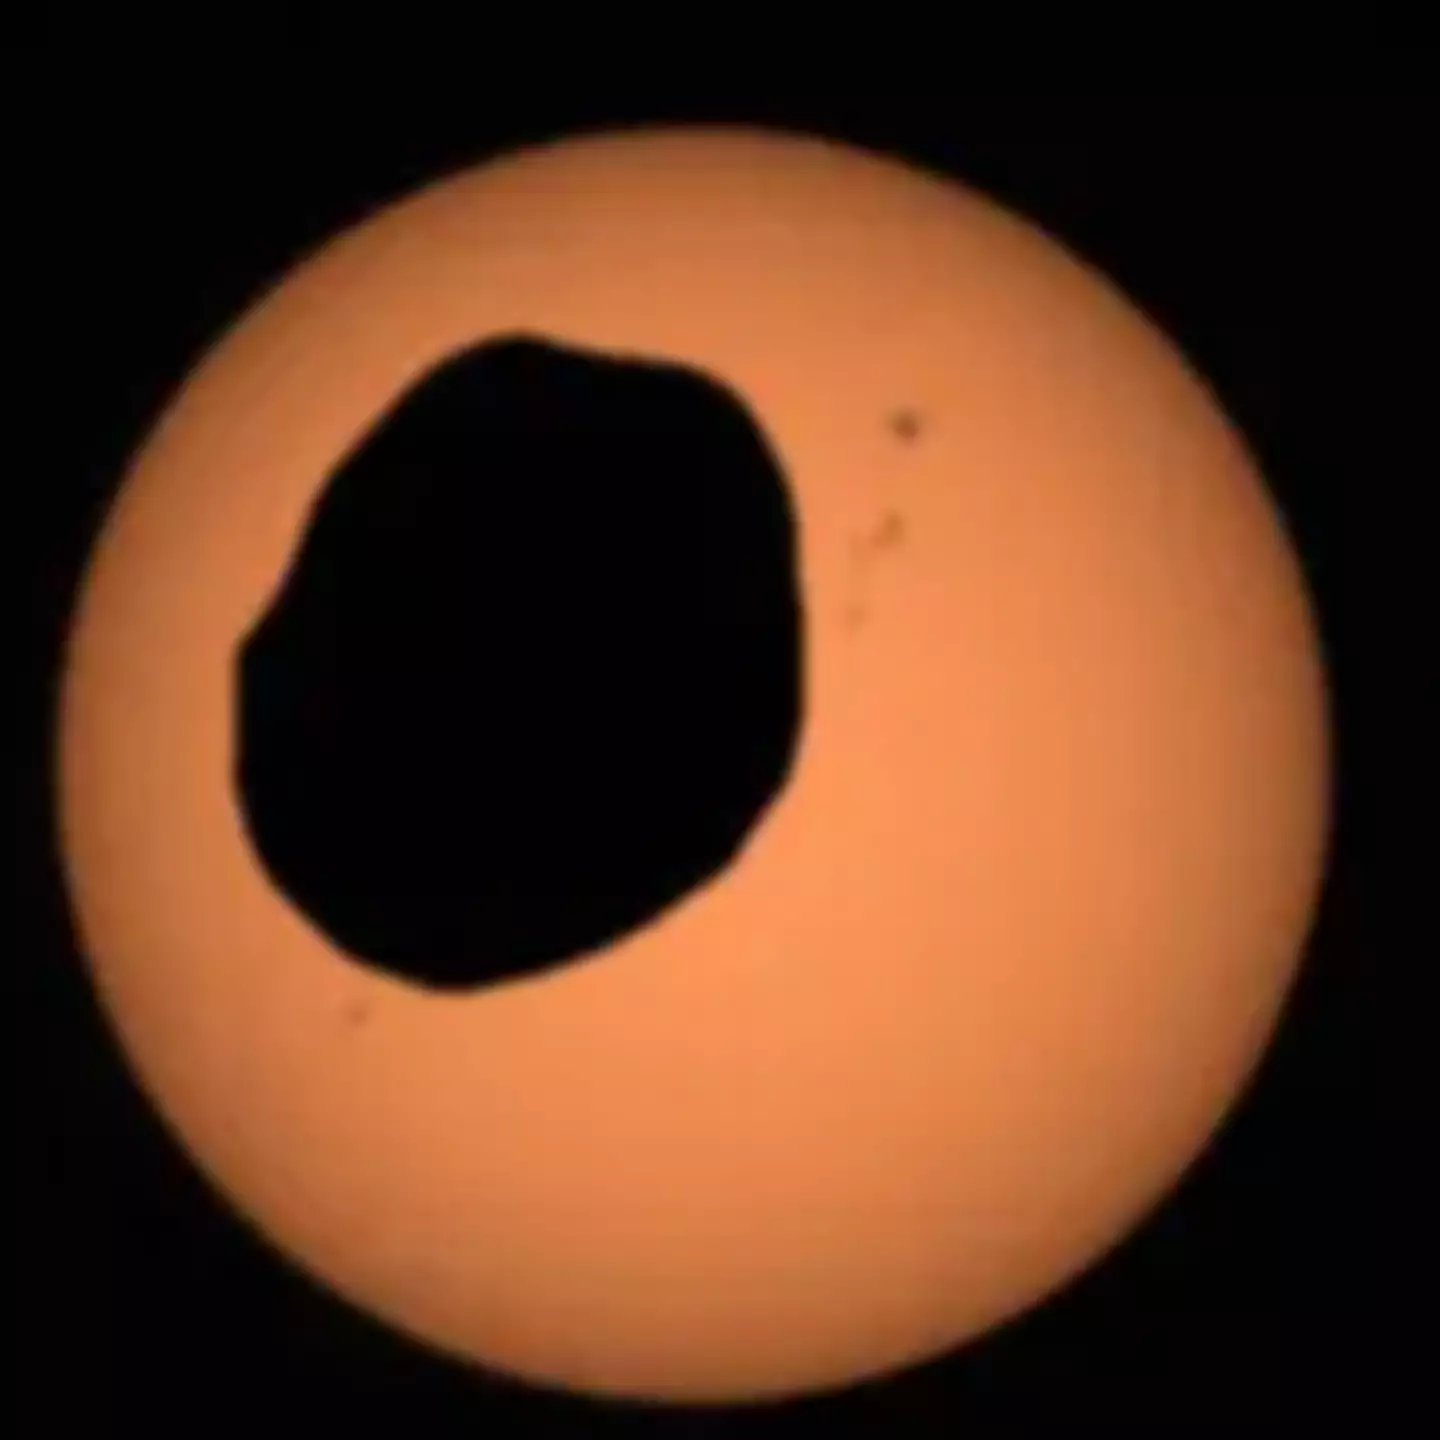 Incredible NASA footage reveals what the solar eclipse looks like on Mars